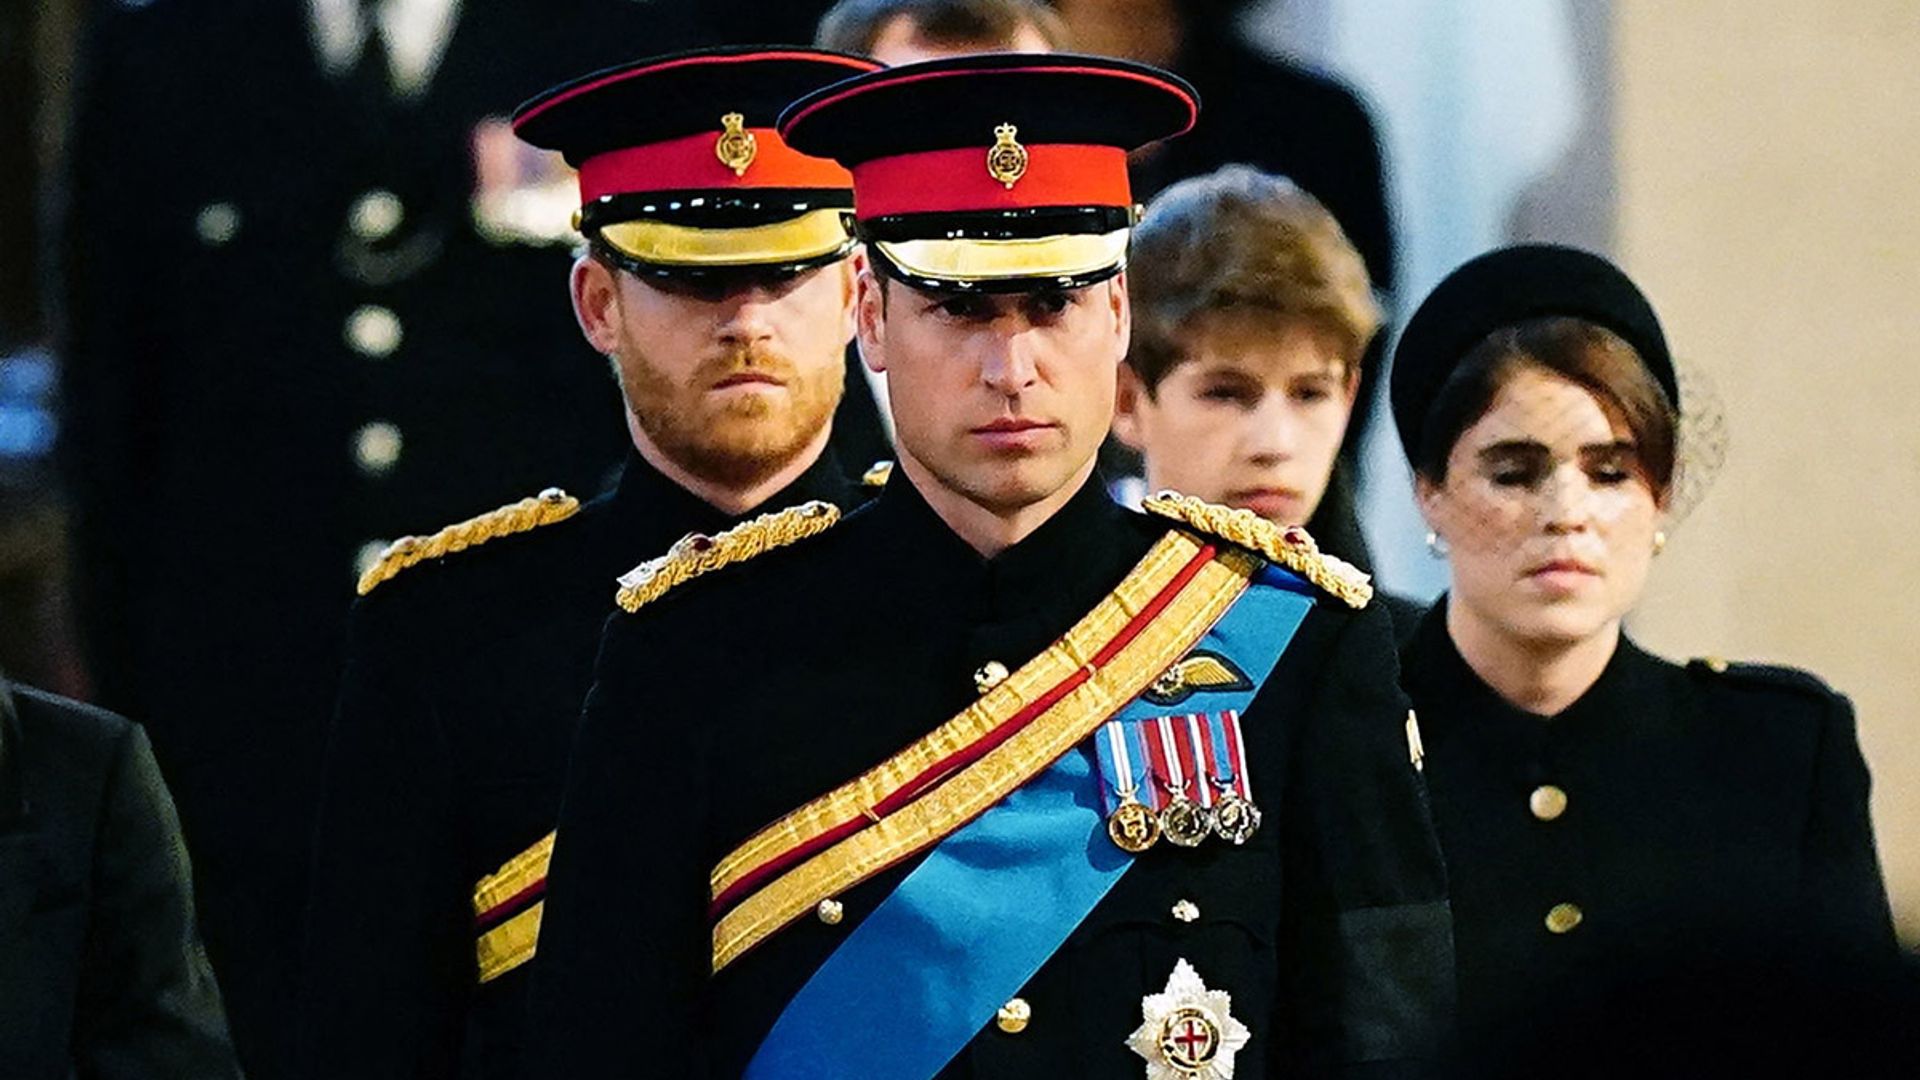 prince william and prince harry uniforms